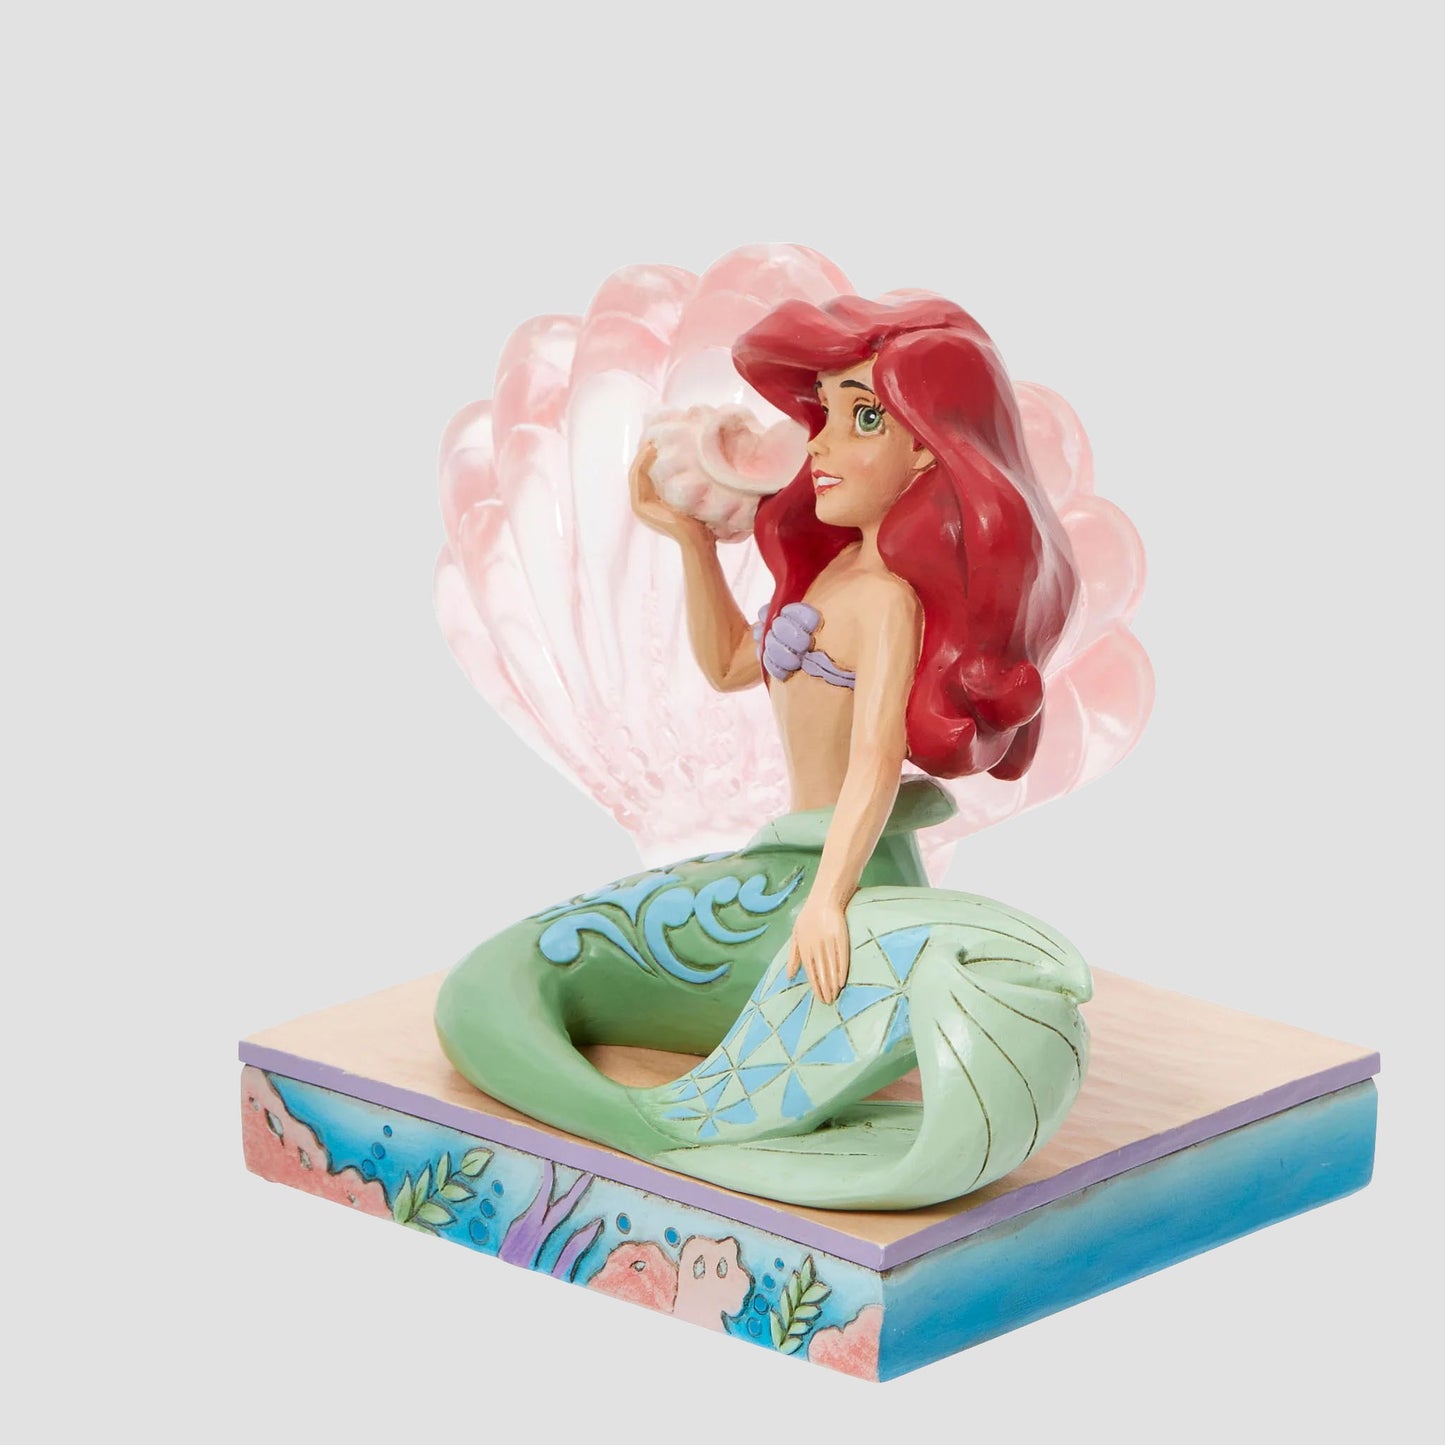 Ariel "A Tail of Love" The Little Mermaid Jim Shore Disney Traditions Statue